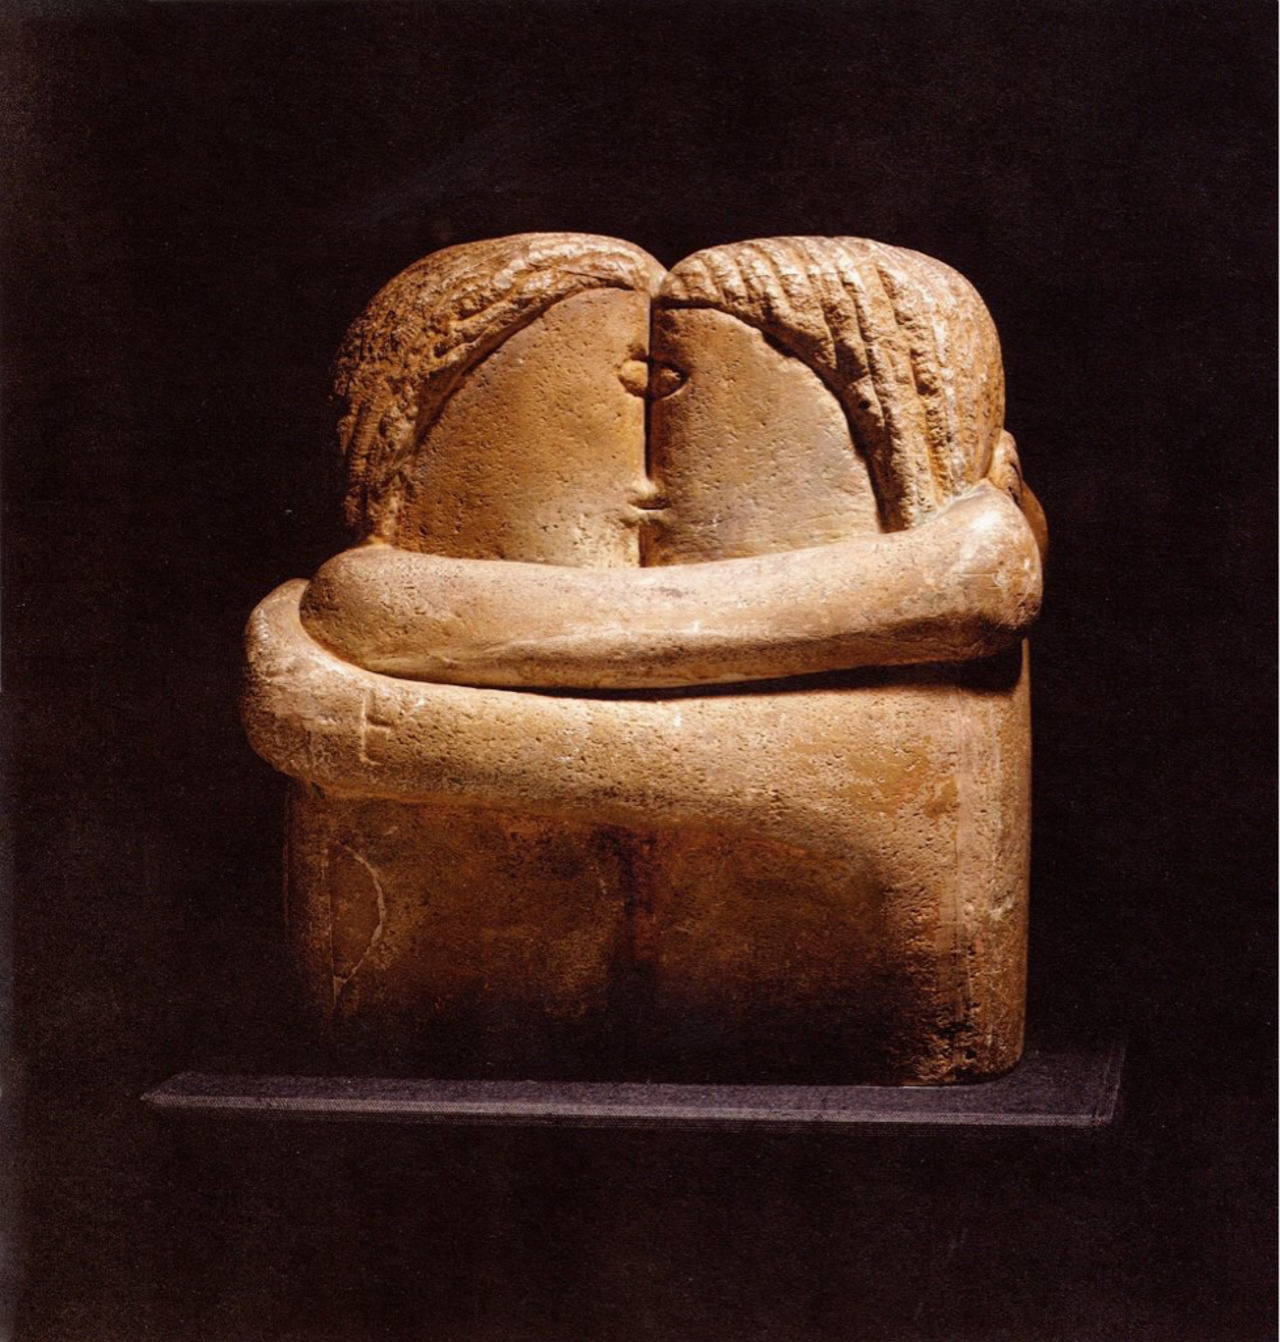 Constantin Brâncusi's "The Kiss" depicts two lovers carved out of a single block of stone. #InternationalKissingDay https://t.co/yXwMsJmtE8